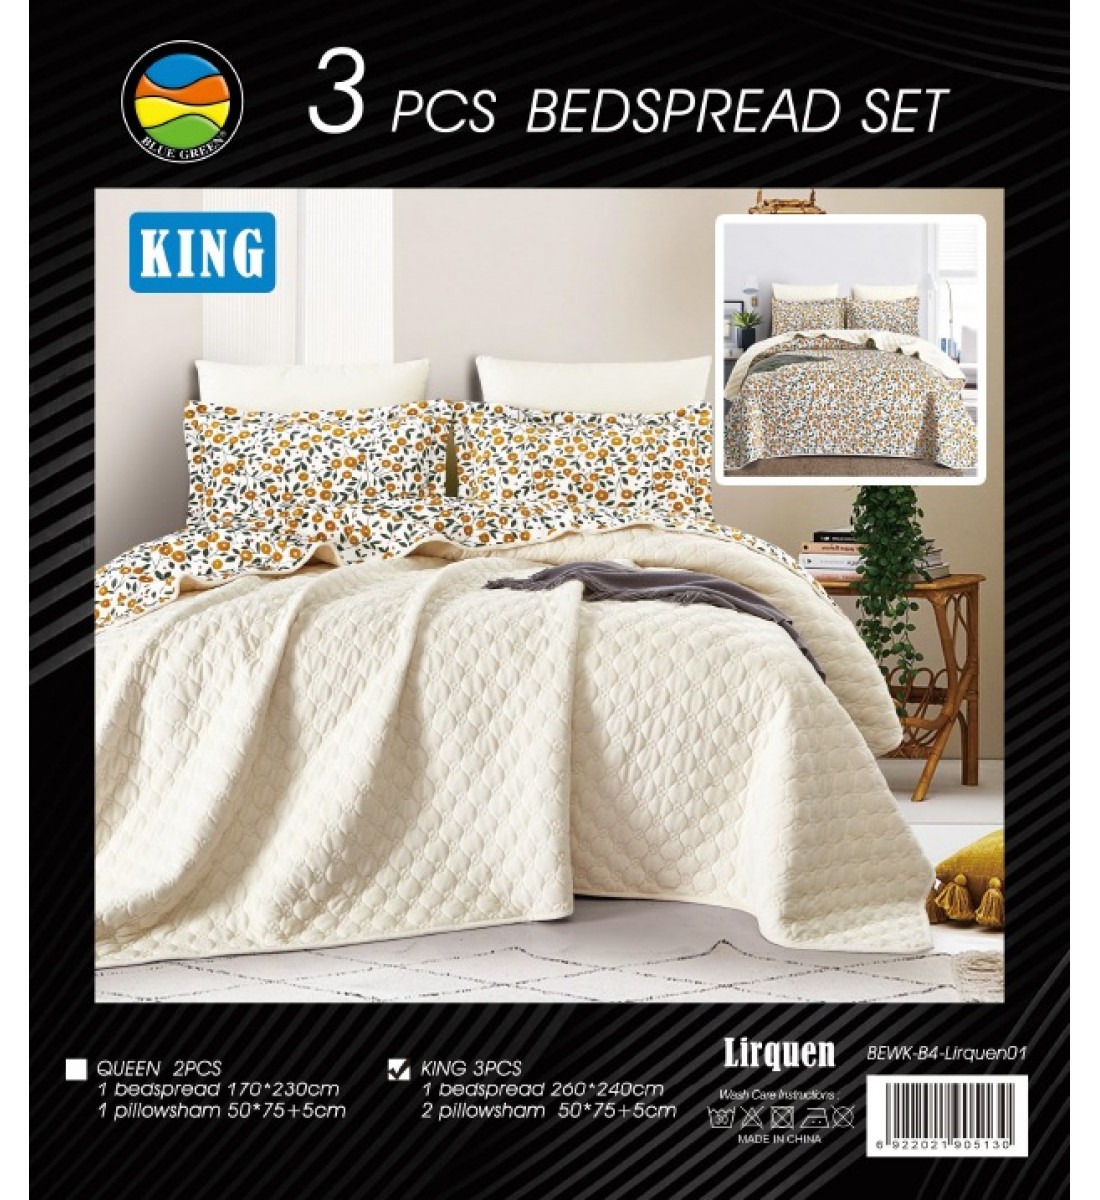 Double bed comforter set, 3 pieces, quality. softness